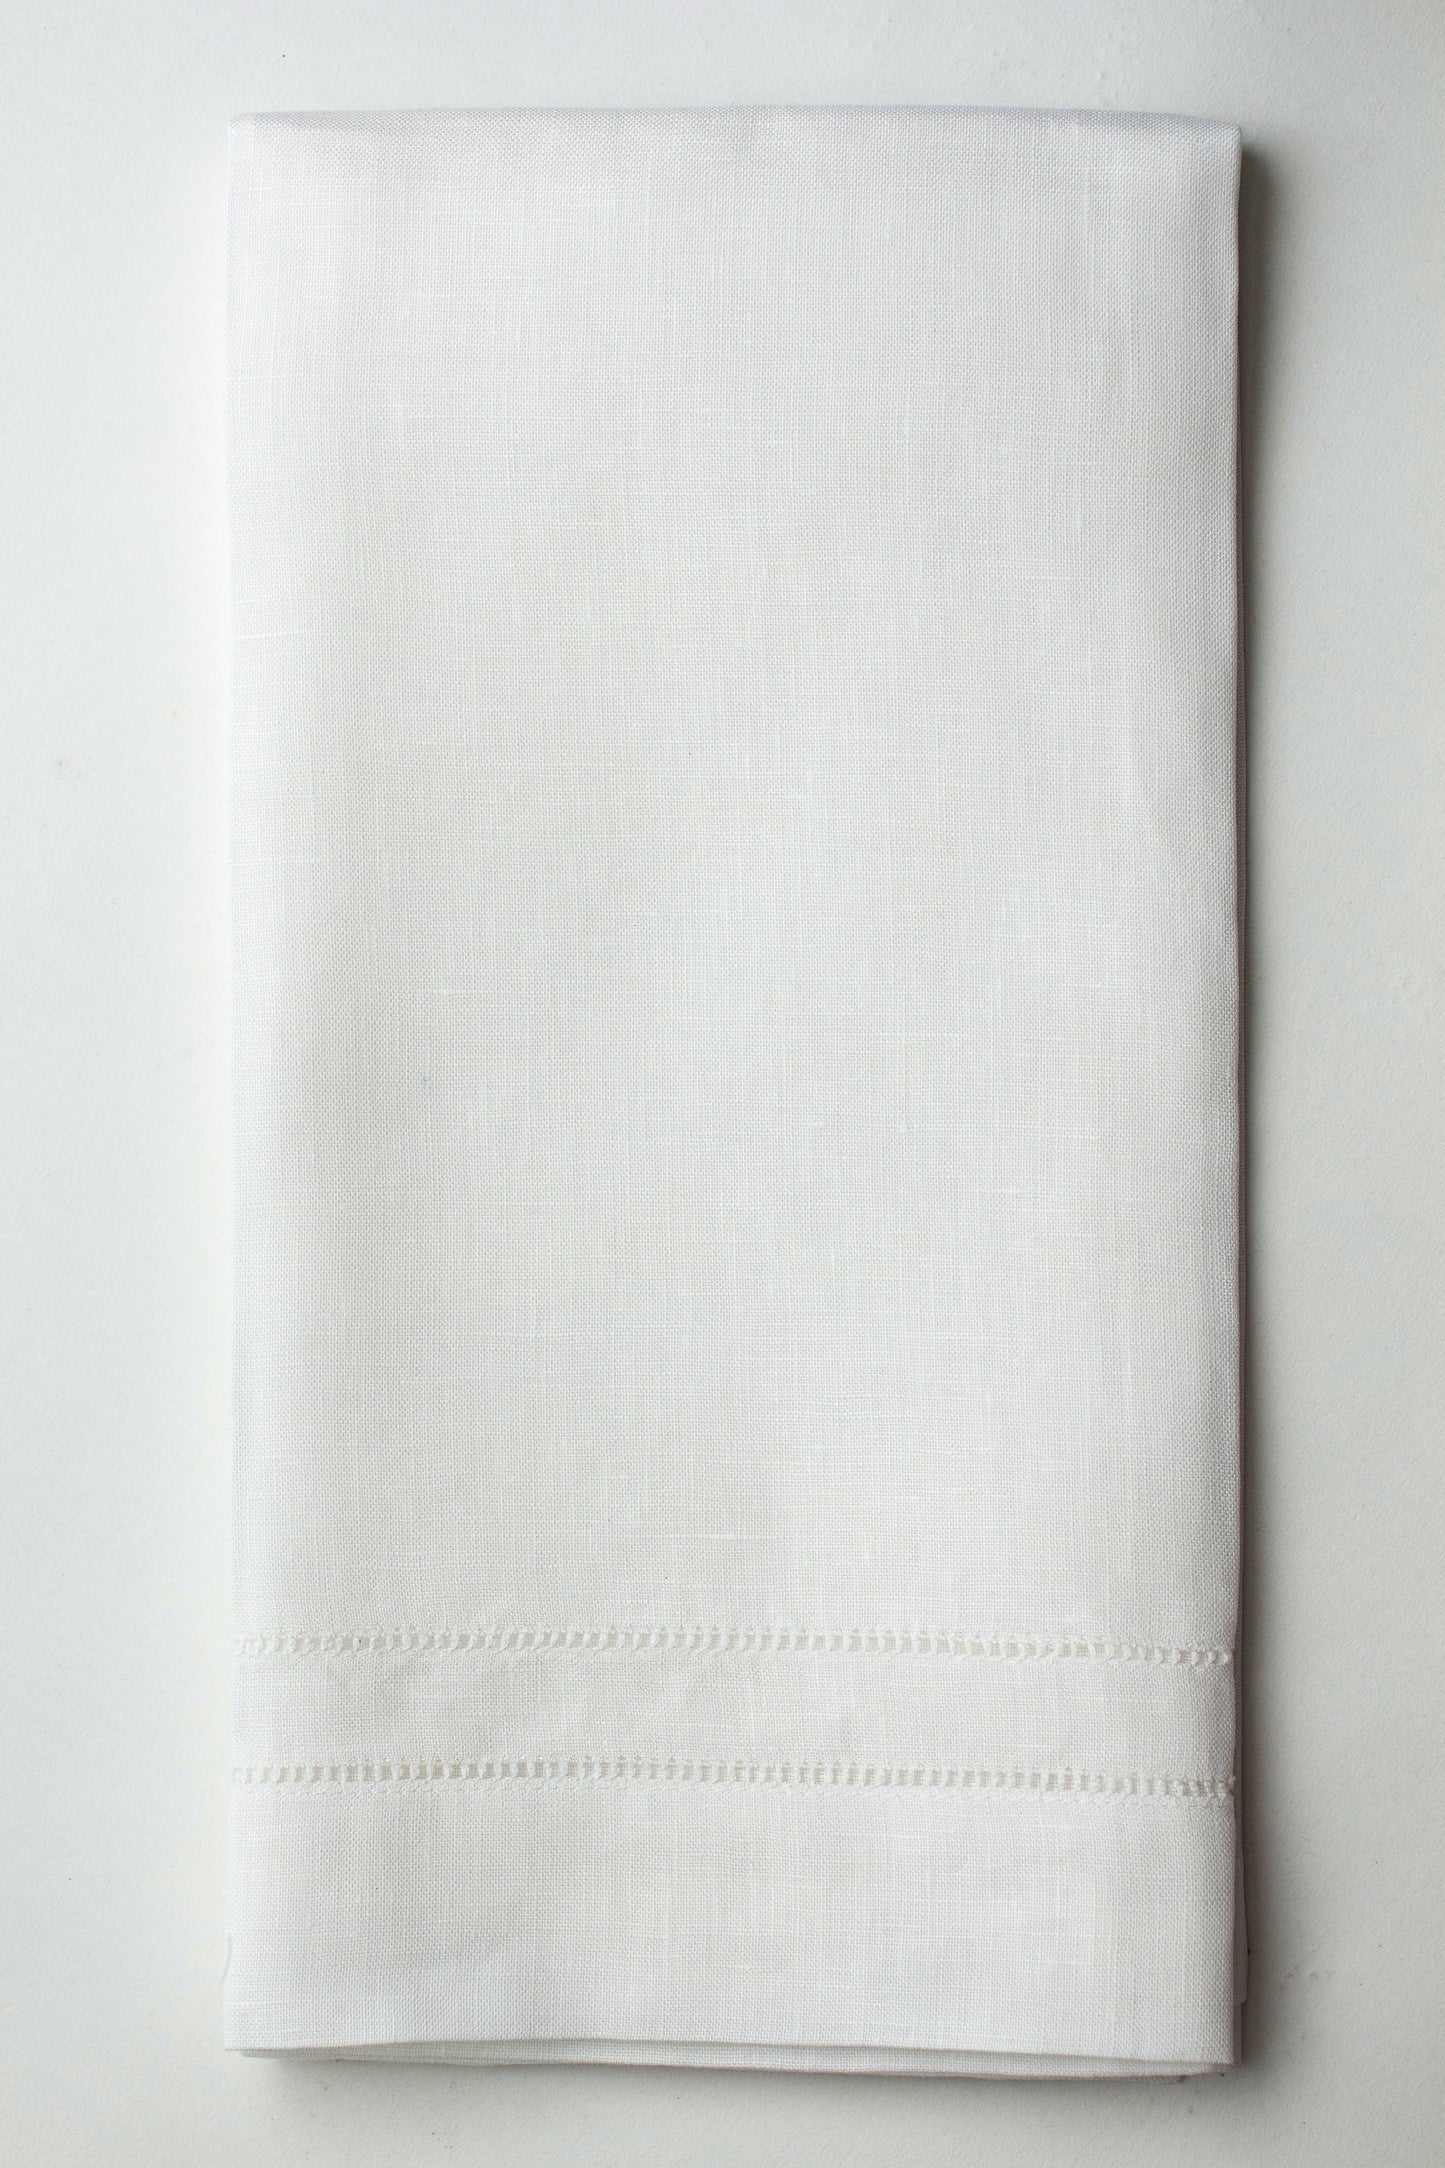 A white linen hand towel with a hemstitch border